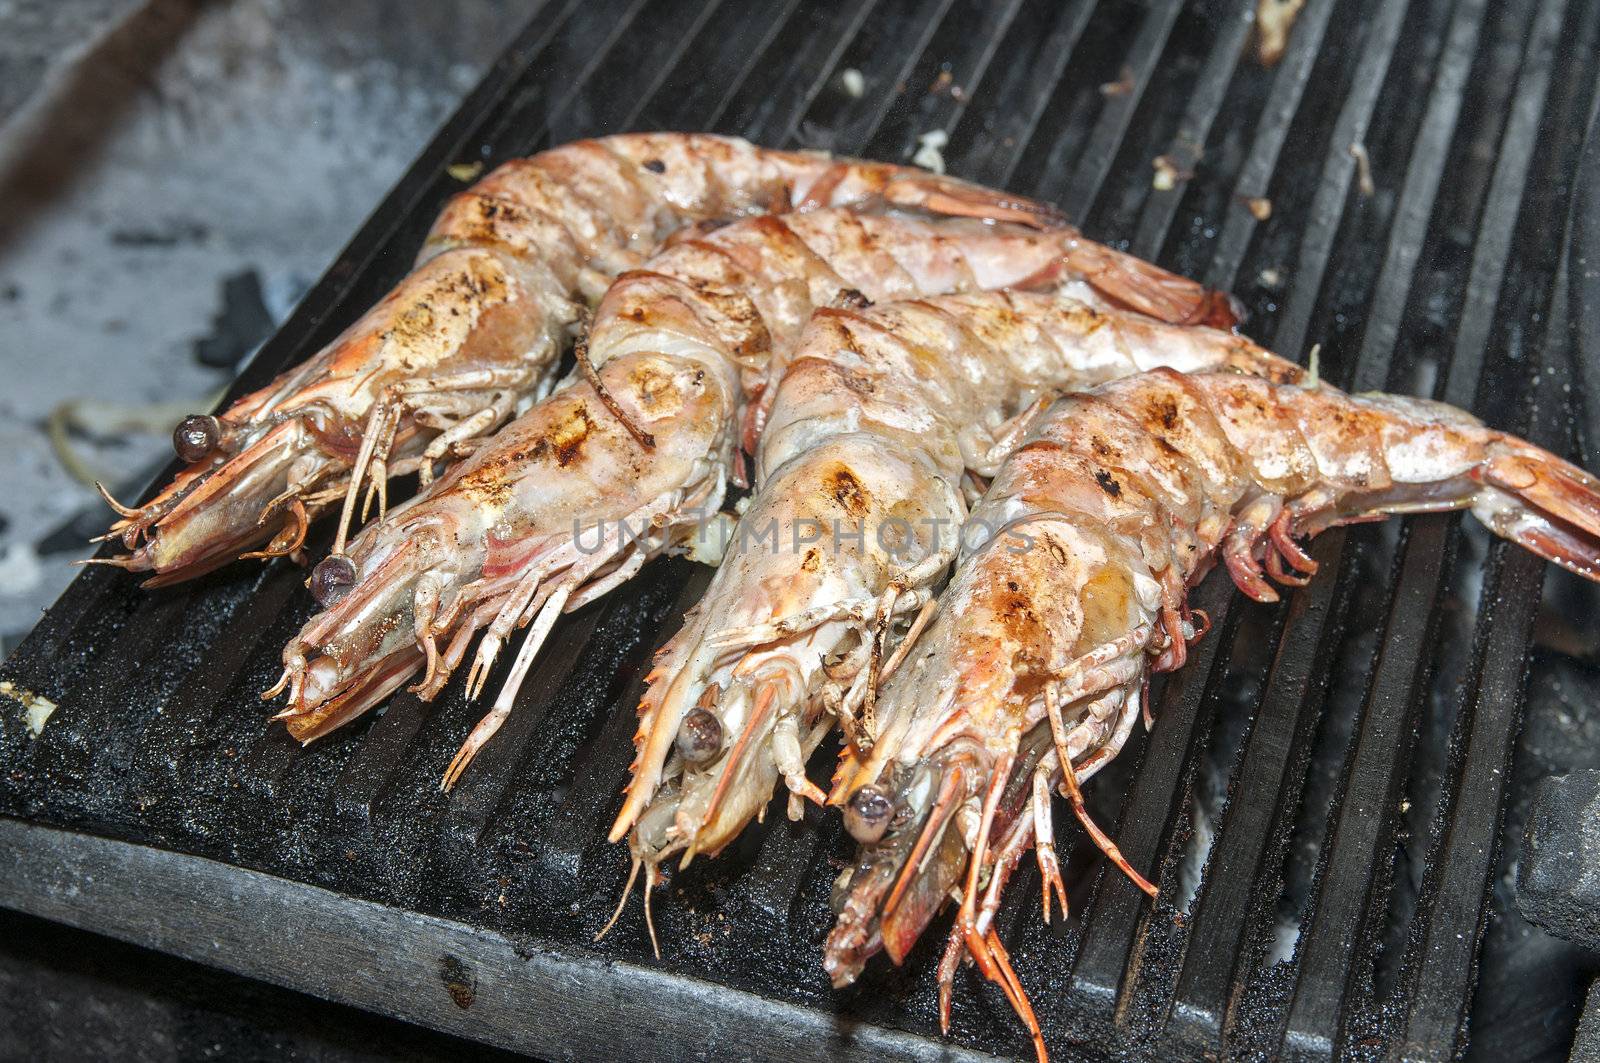 cooking shrimp on the grill in the restaurant